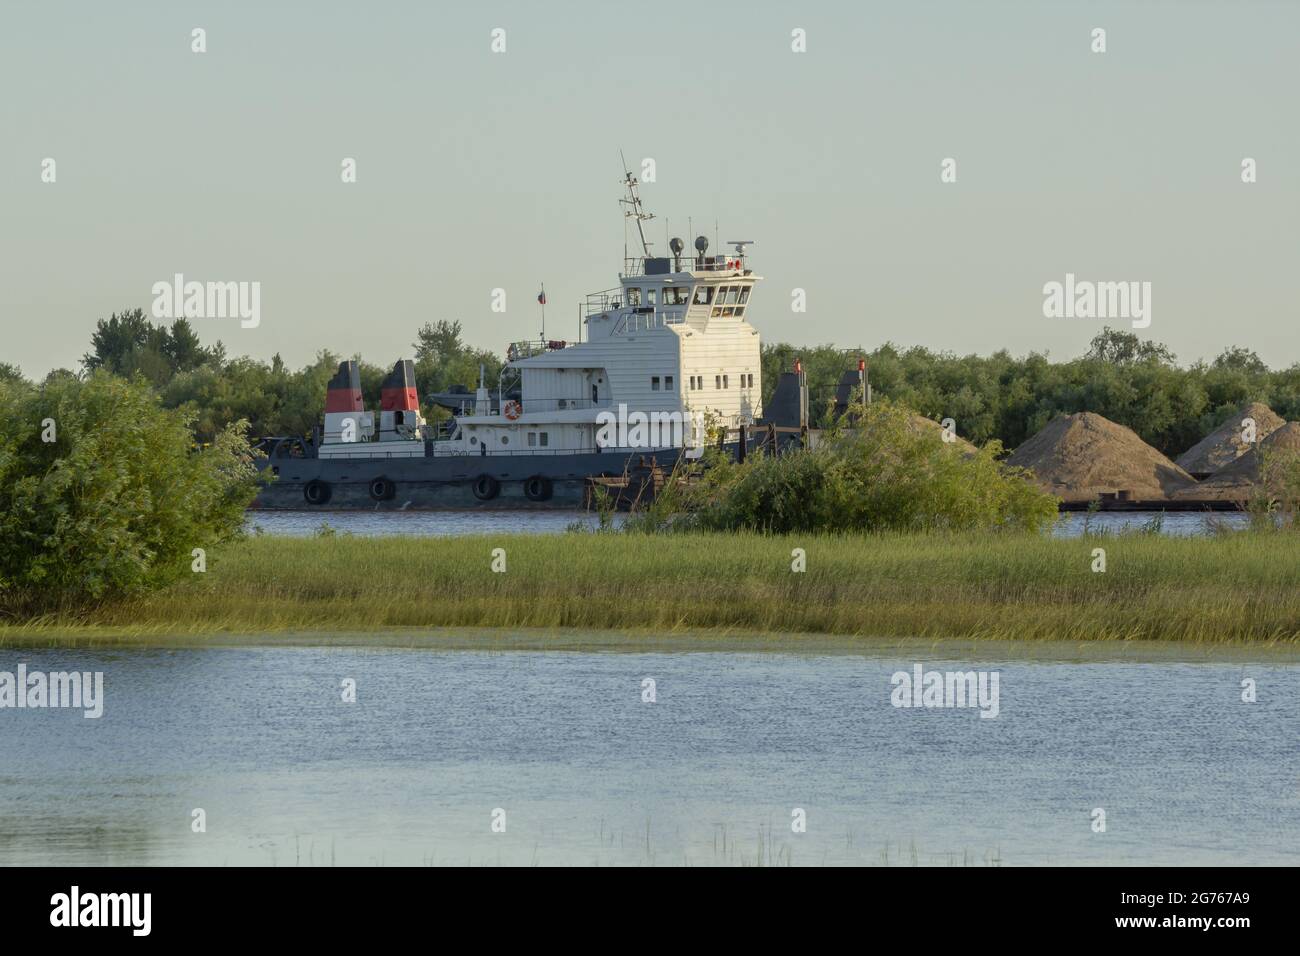 Transportation of building materials on the river. Dry cargo ship pushes a barge with sand along the river. Stock Photo